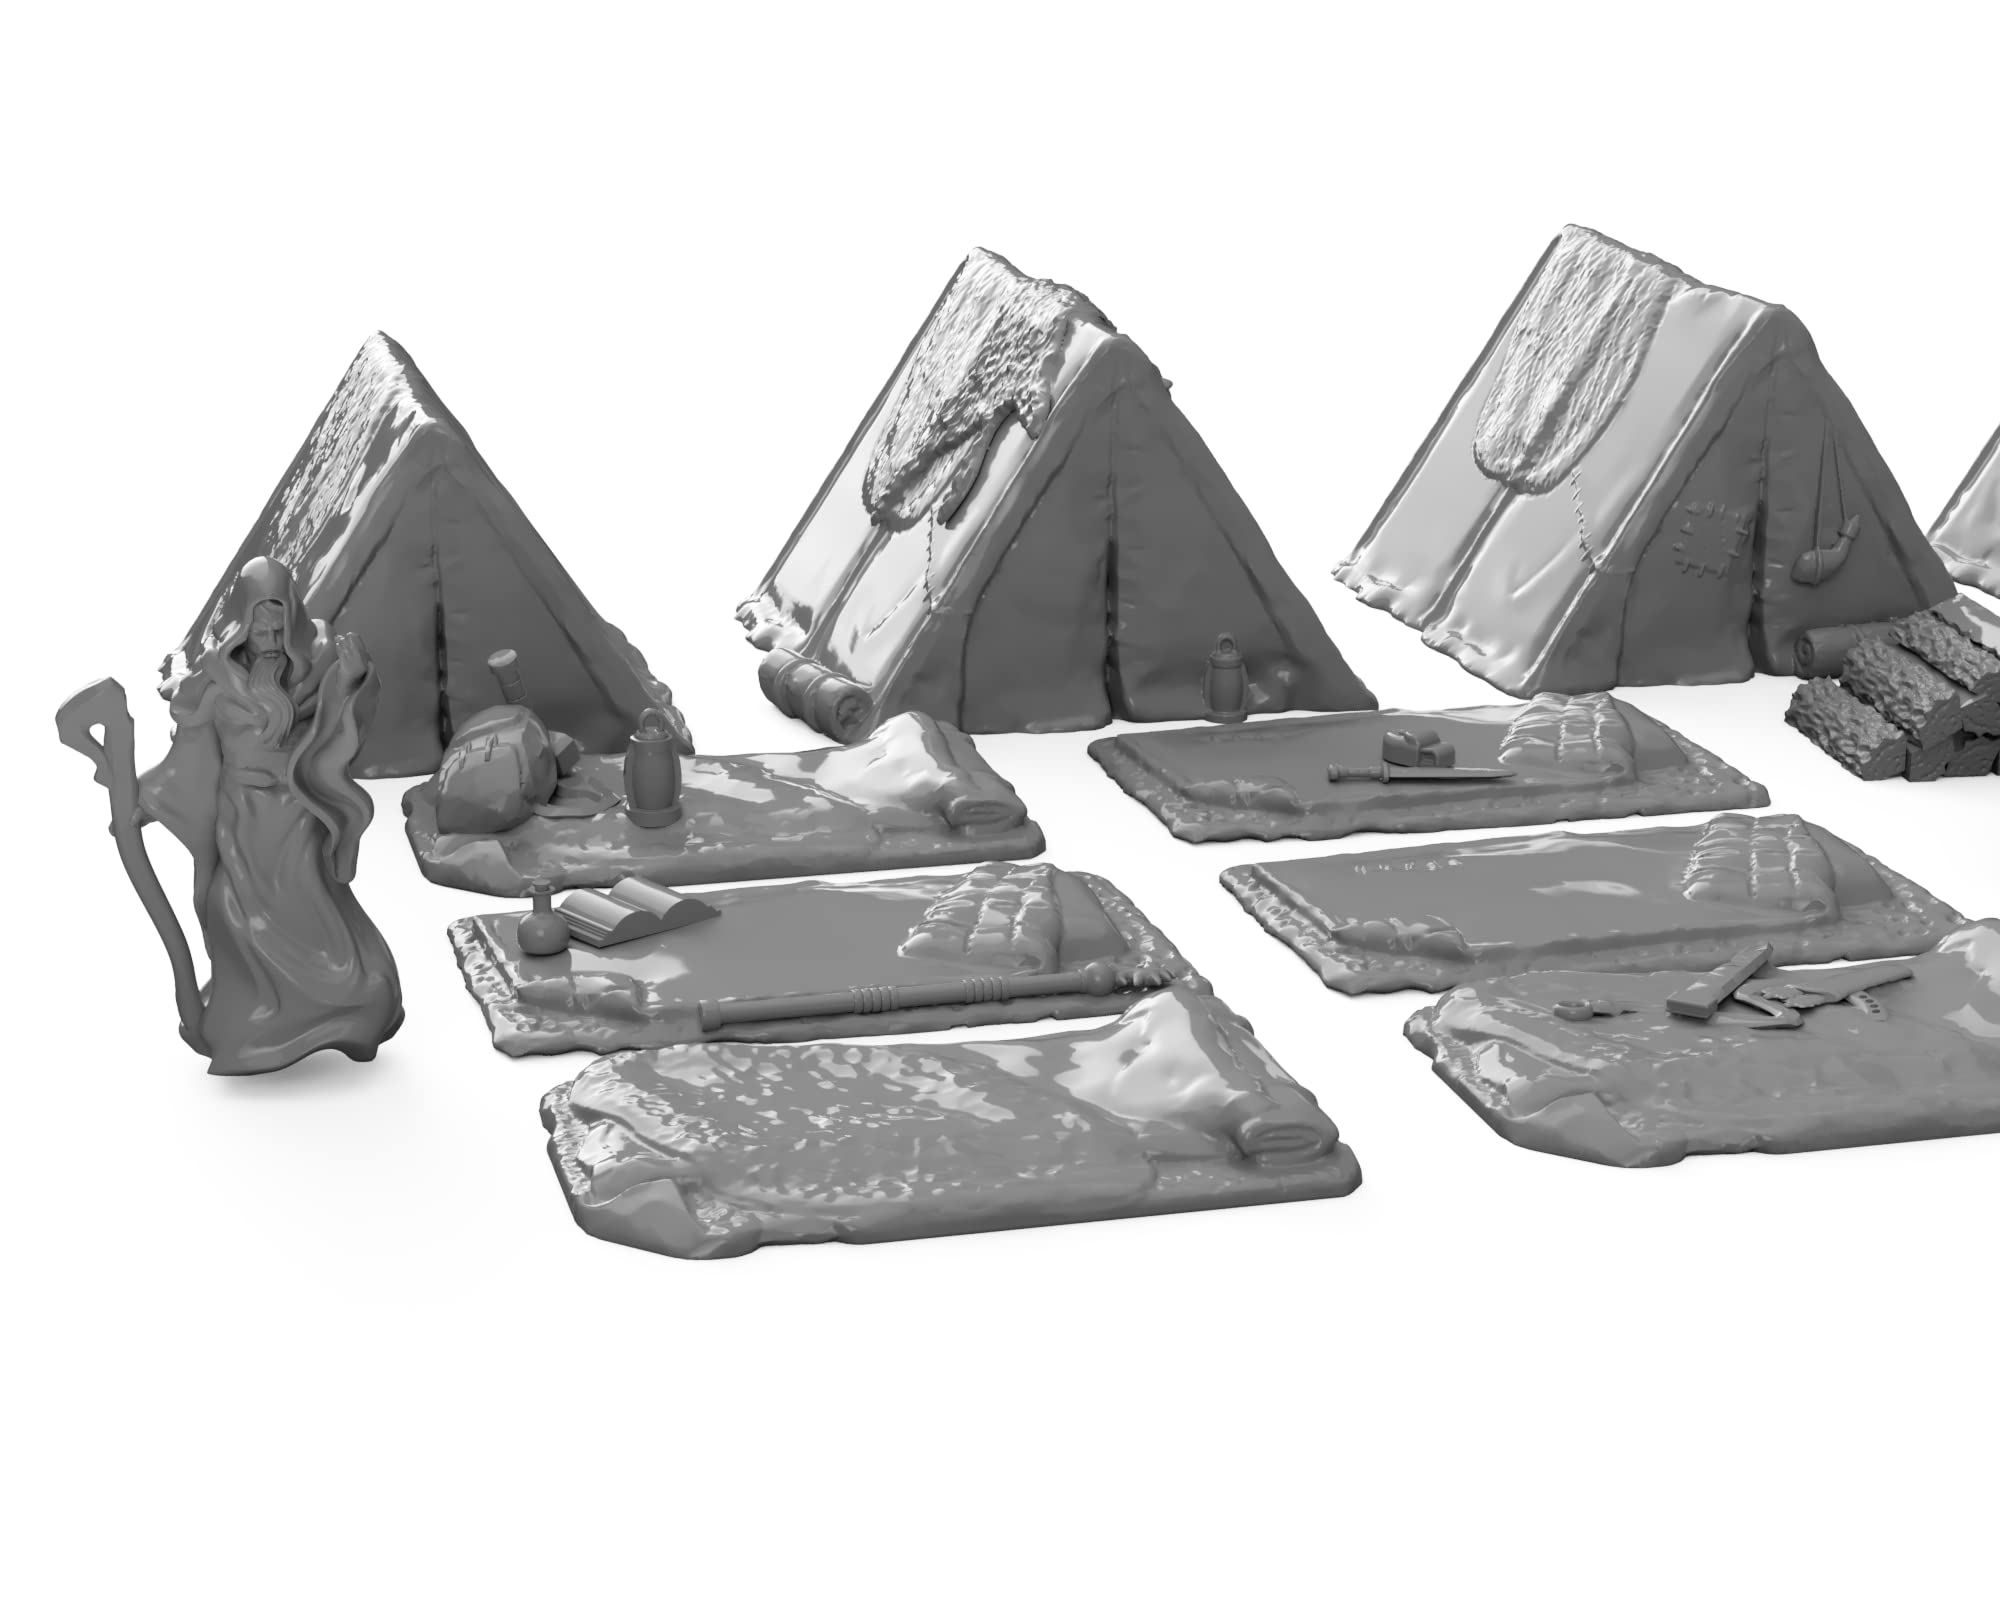 Adventure Camp Set DND Terrain 28mm for Dungeons and Dragons Terrain, D&D, Pathfinder, Warhammer 40k, RPG, Miniatures, Tabletop, D and D, Dungeons and Dragons Gifts